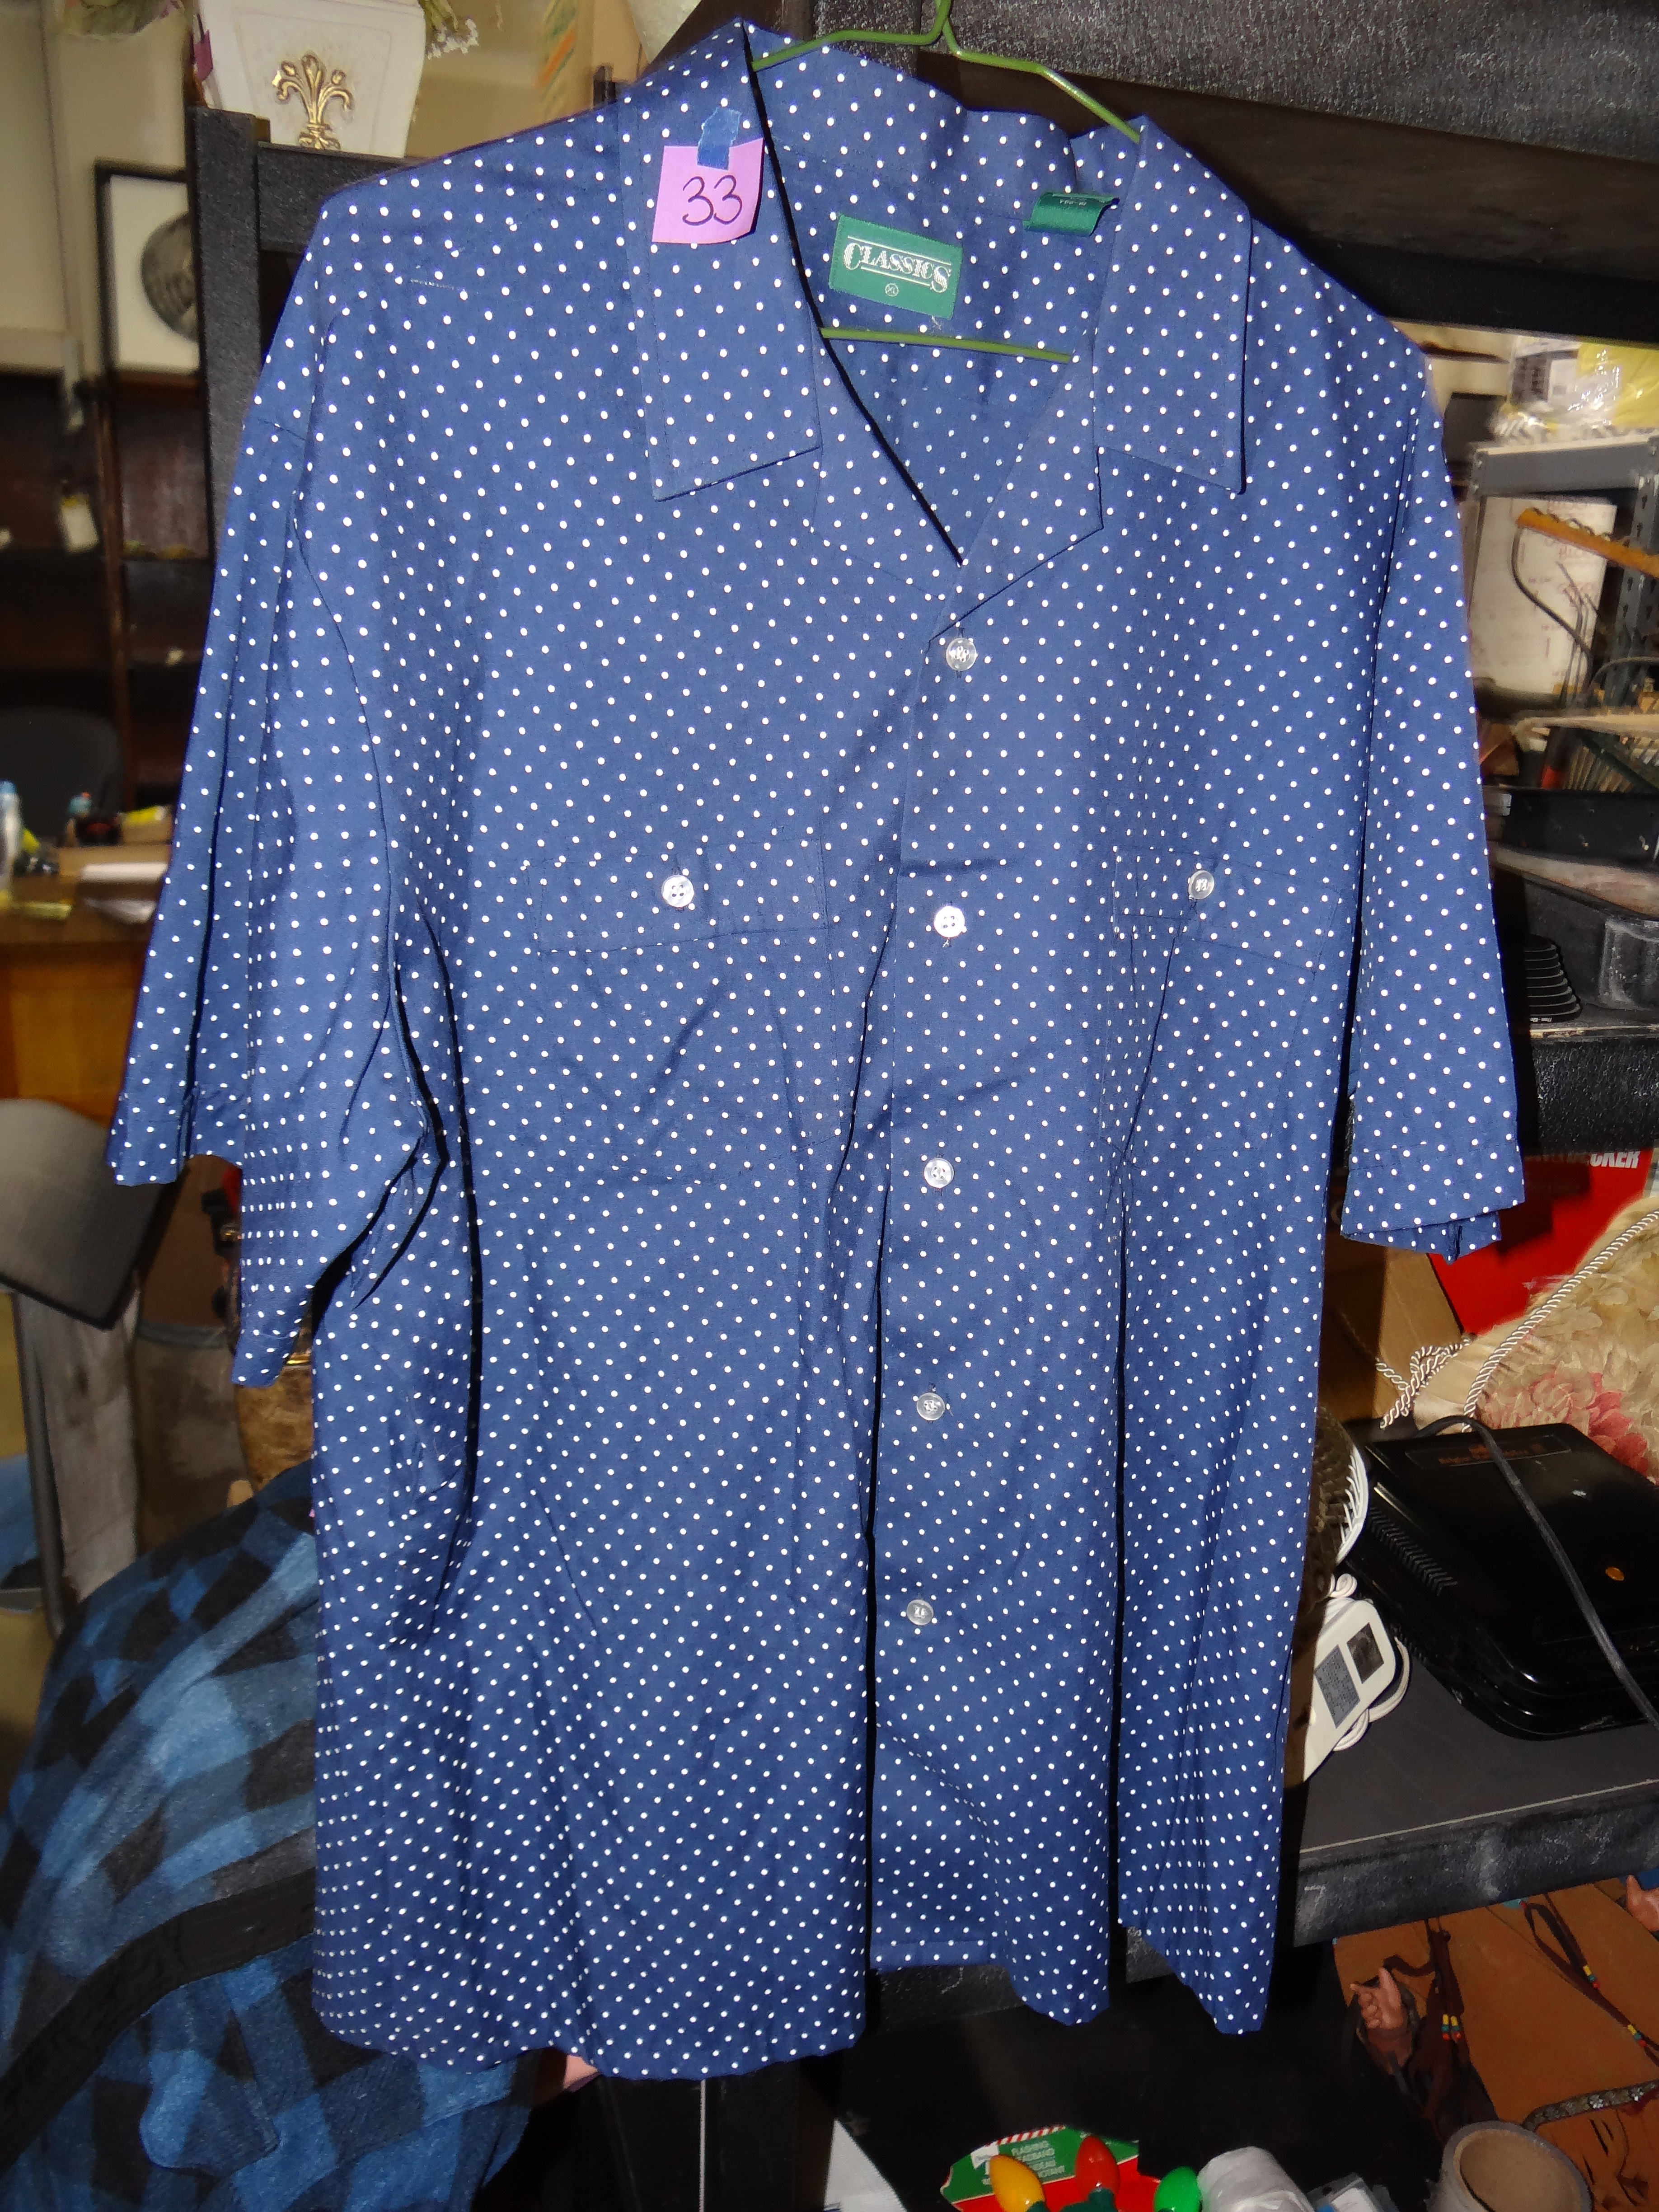 33-Classics By Sears Blue w/ White Polka Dots Button Up Shirt Size XL